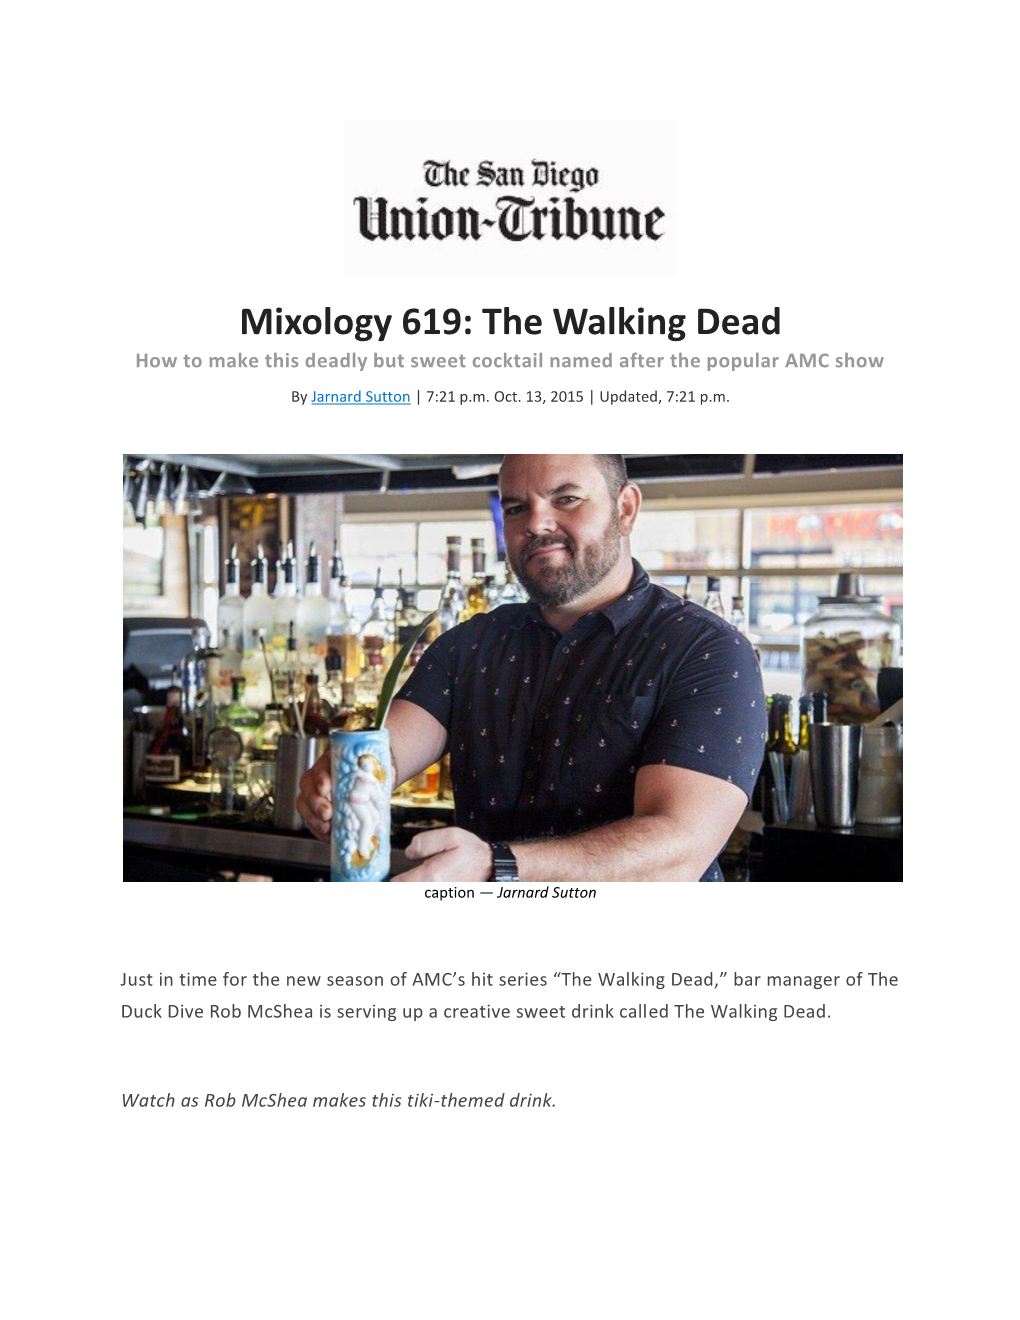 Mixology 619: the Walking Dead How to Make This Deadly but Sweet Cocktail Named After the Popular AMC Show by Jarnard Sutton | 7:21 P.M